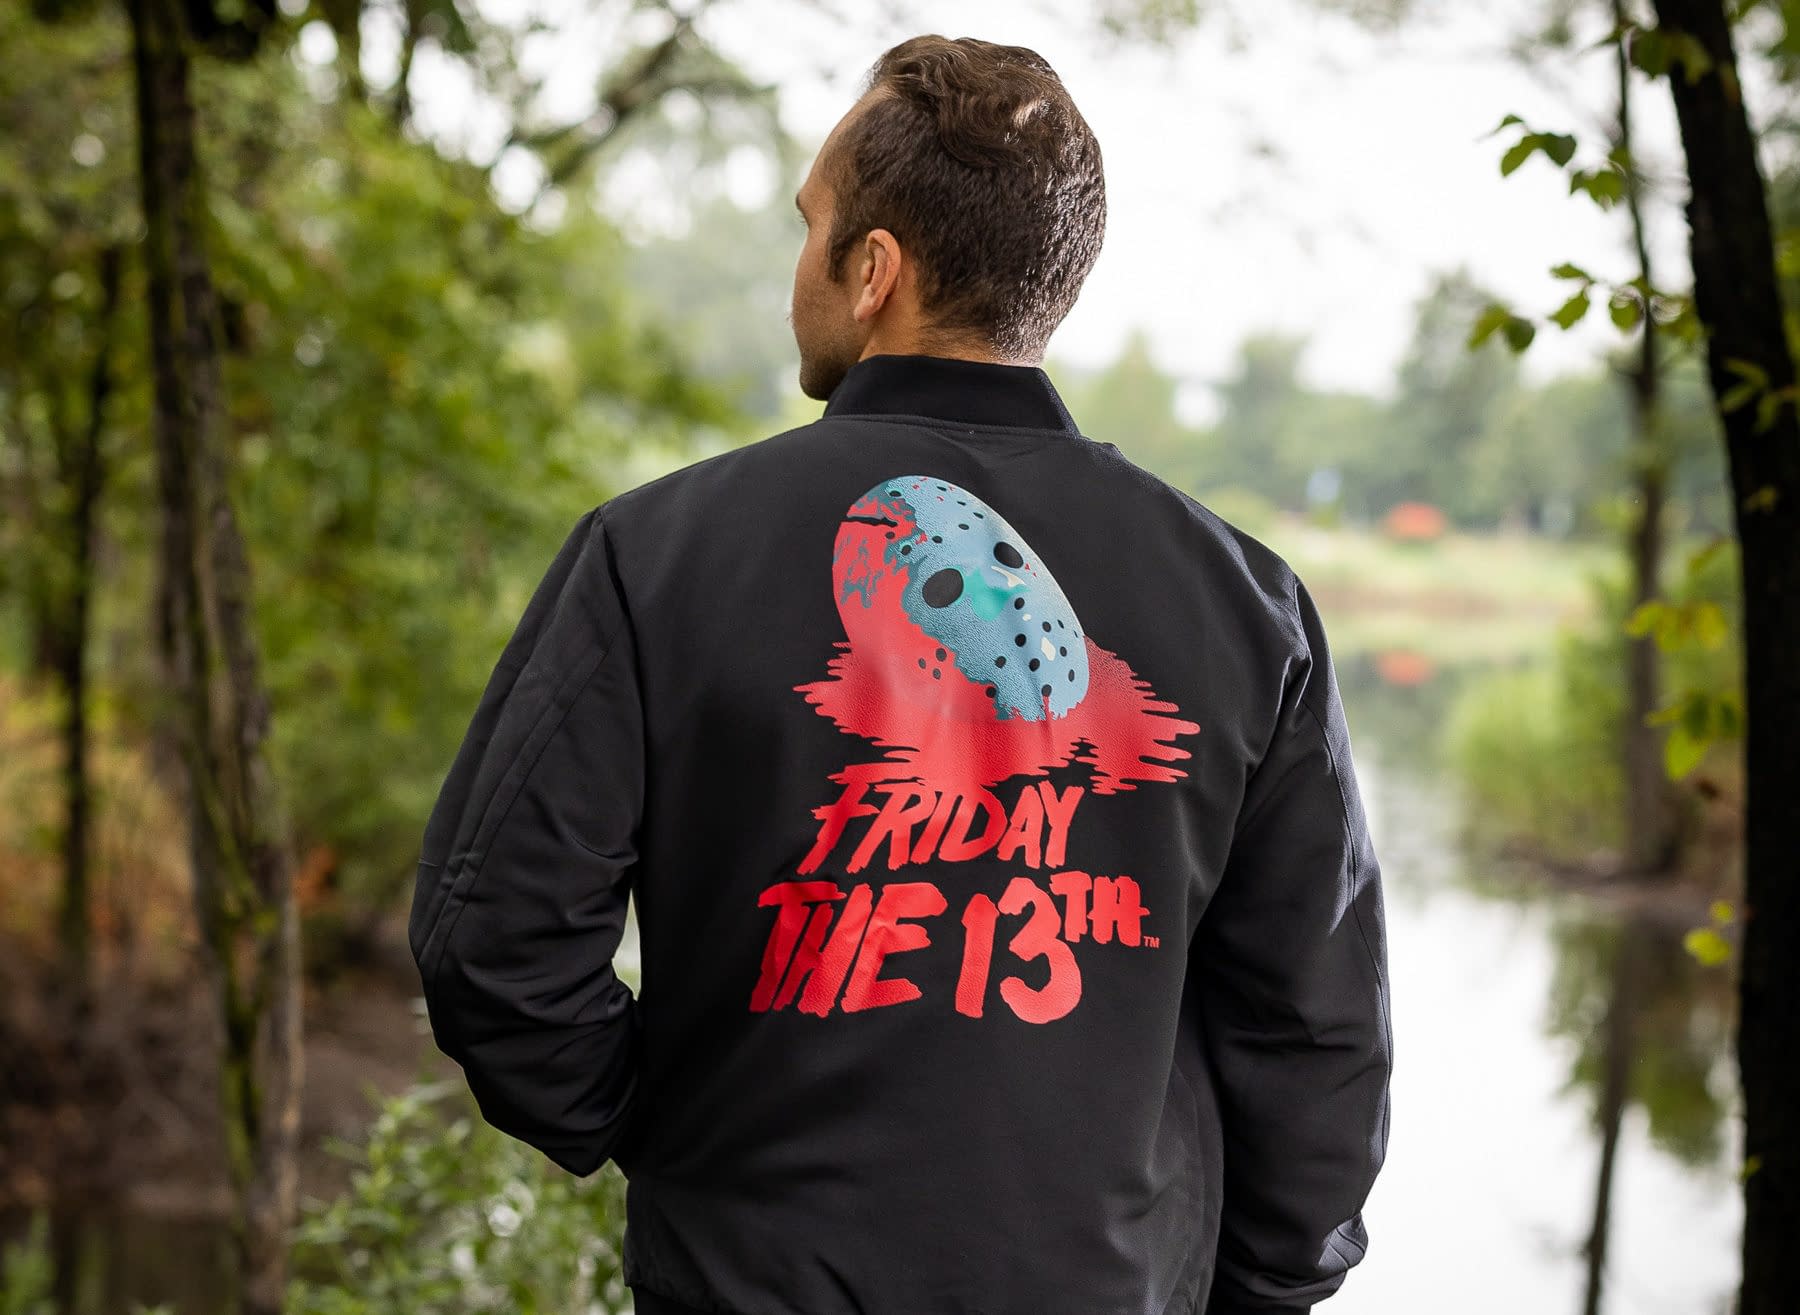 Friday the 13th camping trip: Jason Voorhees awaits